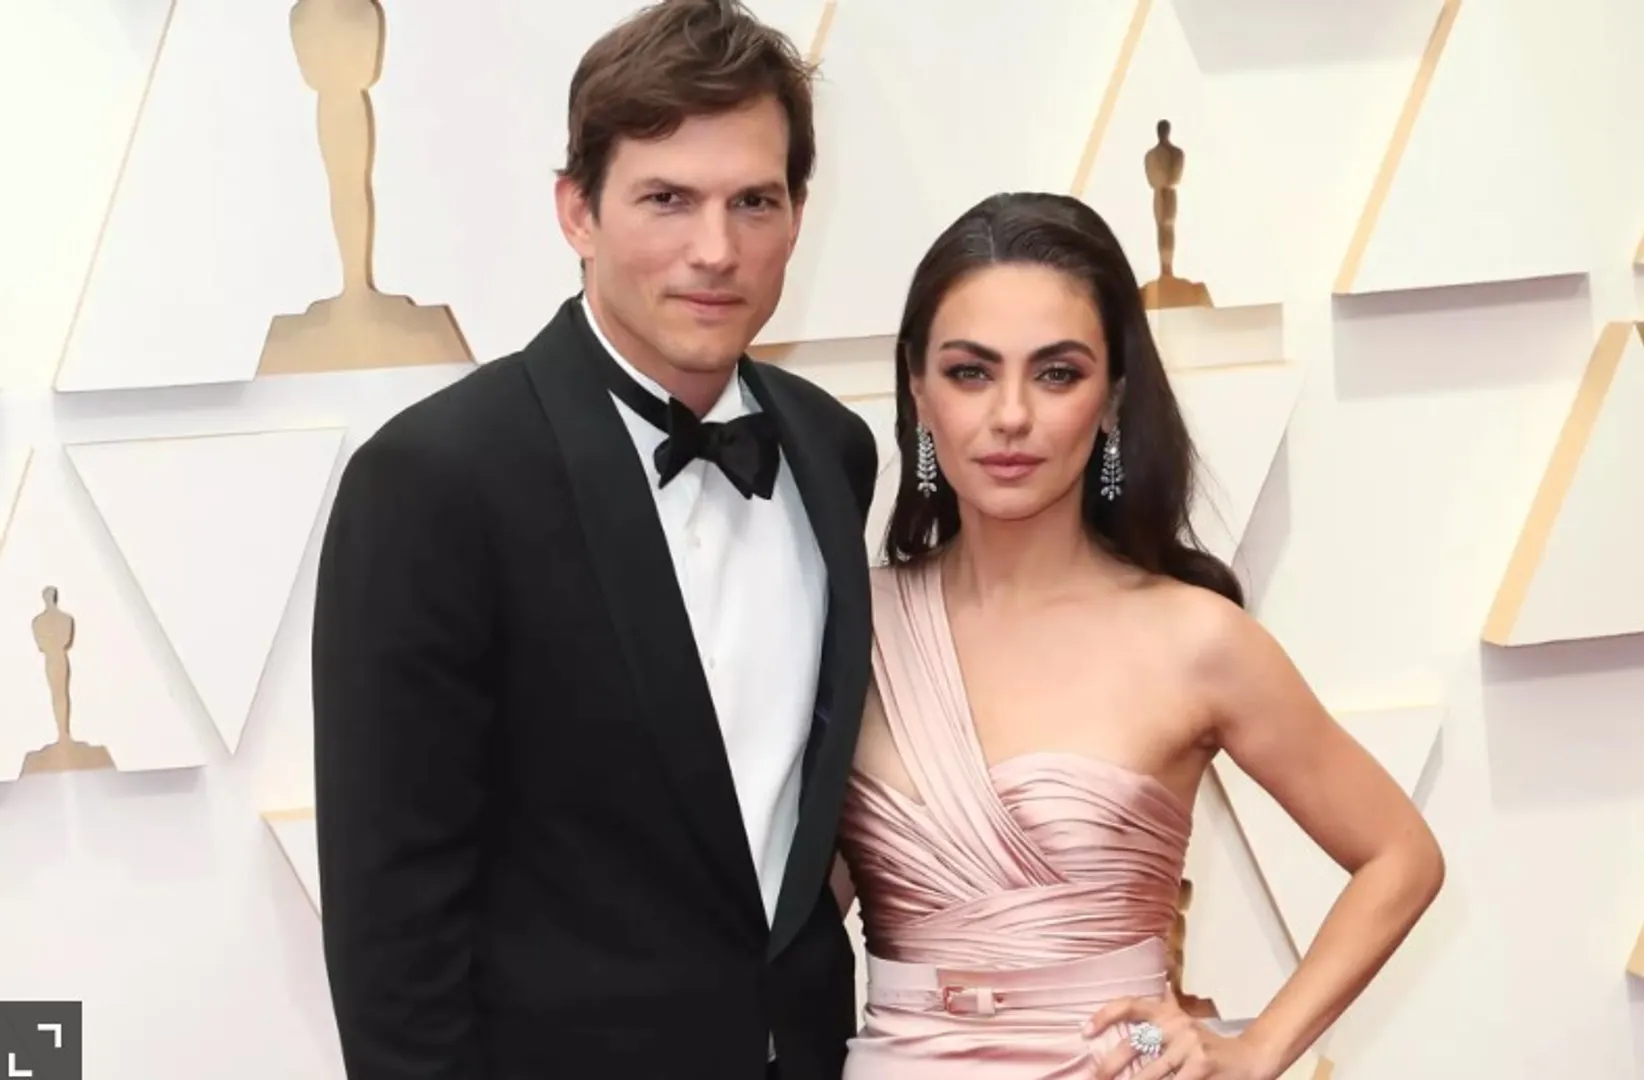 NFT-funded animated series Stoner Cats starring Ashton Kutcher and Mila Kunis fined $1 million by the SEC https://ew.com/tv/ashton-kutcher-mila-kunis-animated-series-stoner-cats-fined-1-million-by-the-sec/ - The series also "agreed to destroy all NFTs in its possession or control and publish notice of the order on its website and social media channels."